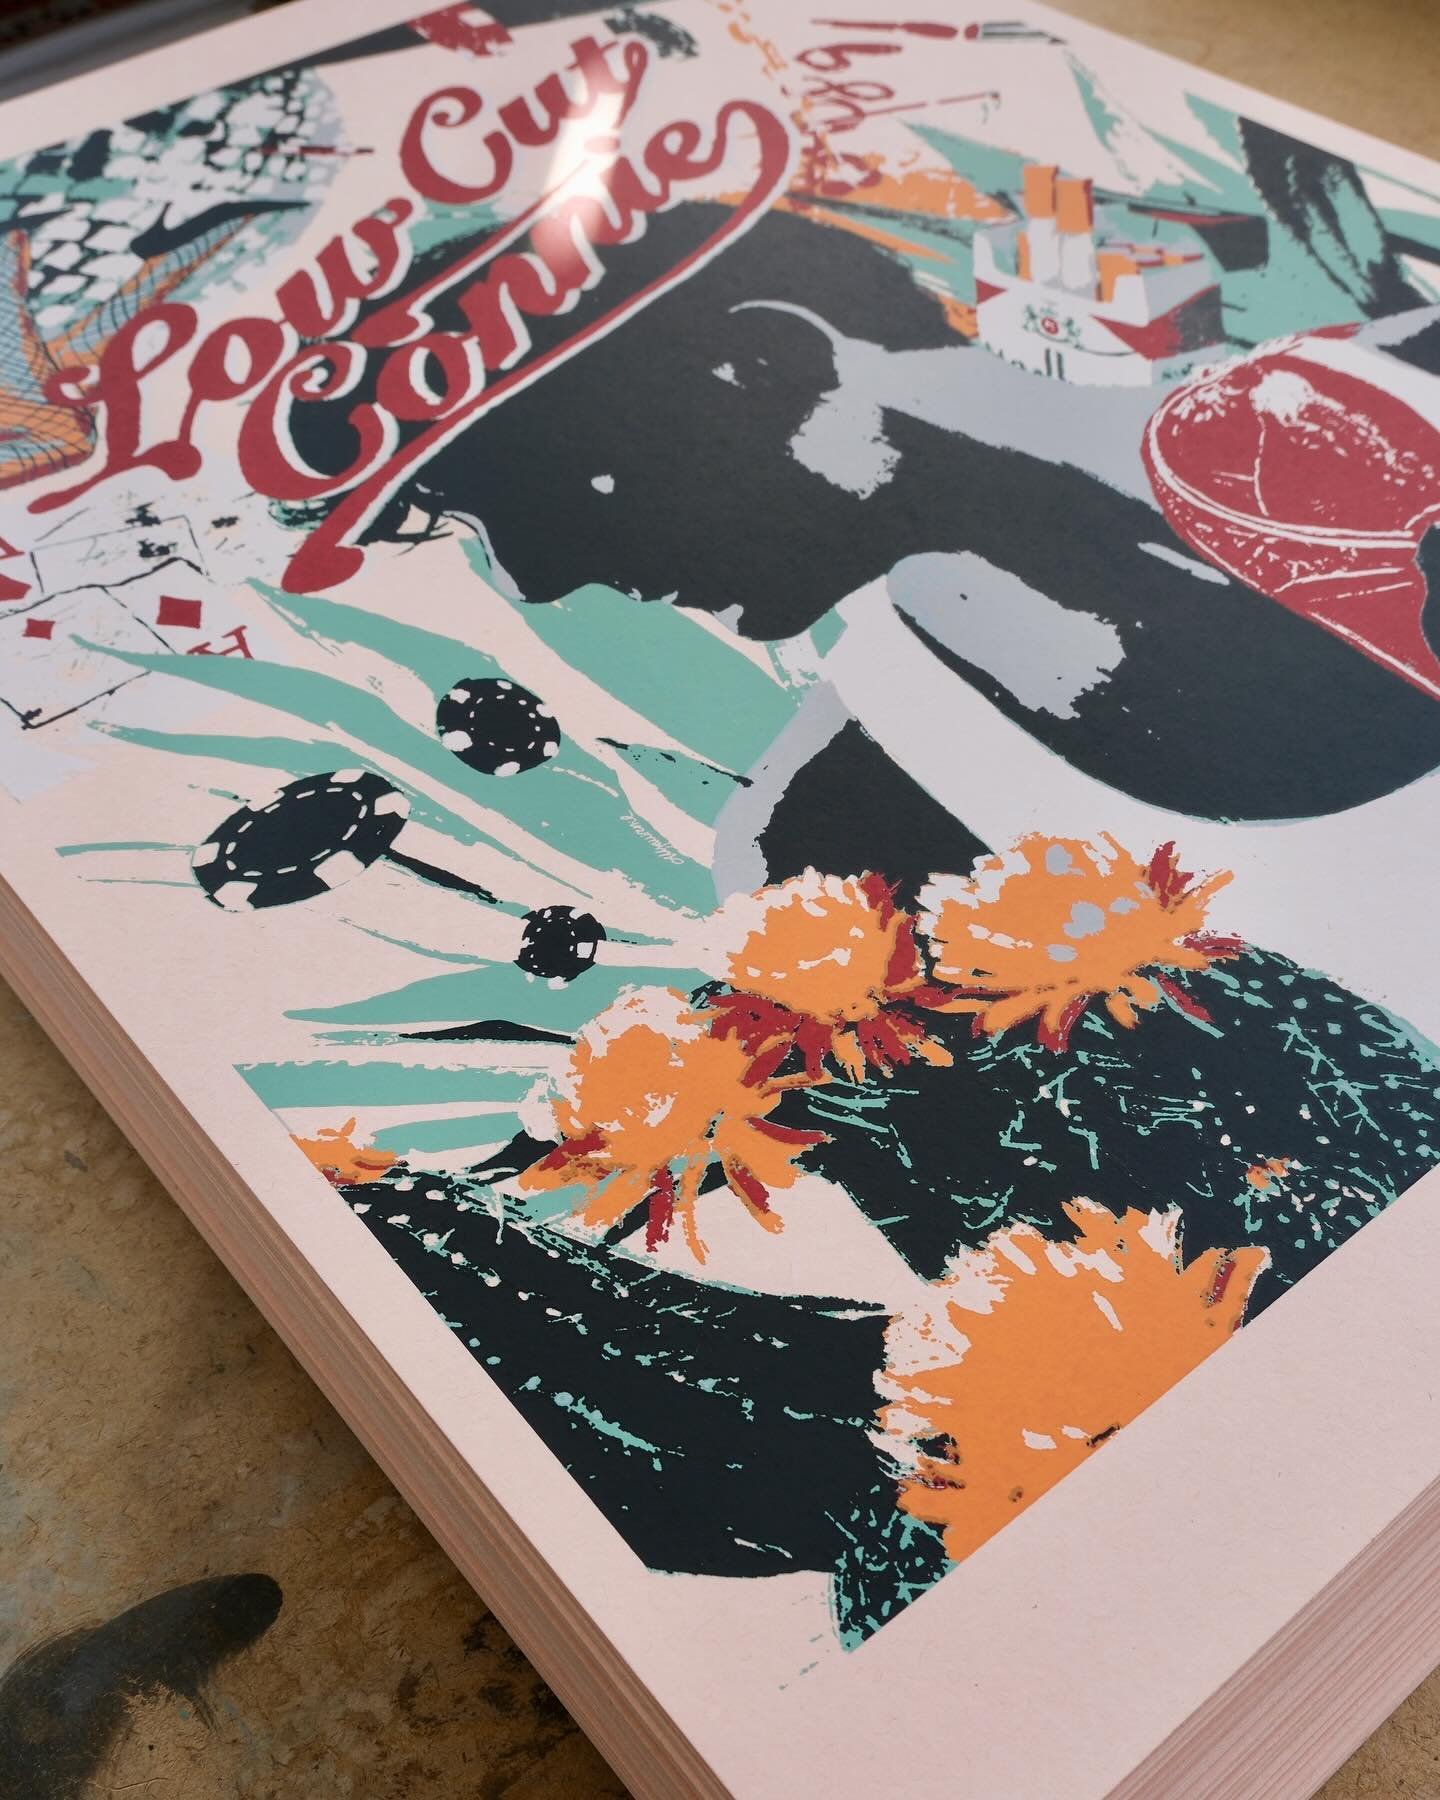 Some fun posters for Low Cut Connie&rsquo;s current tour. @lowcutconnie art by @anniesnaxart

These posters are a six layer screen print onto French Paper&rsquo;s , Memo Orange, 100lb cover. They&rsquo;re available now on tour. Check @lowcutconnie fo